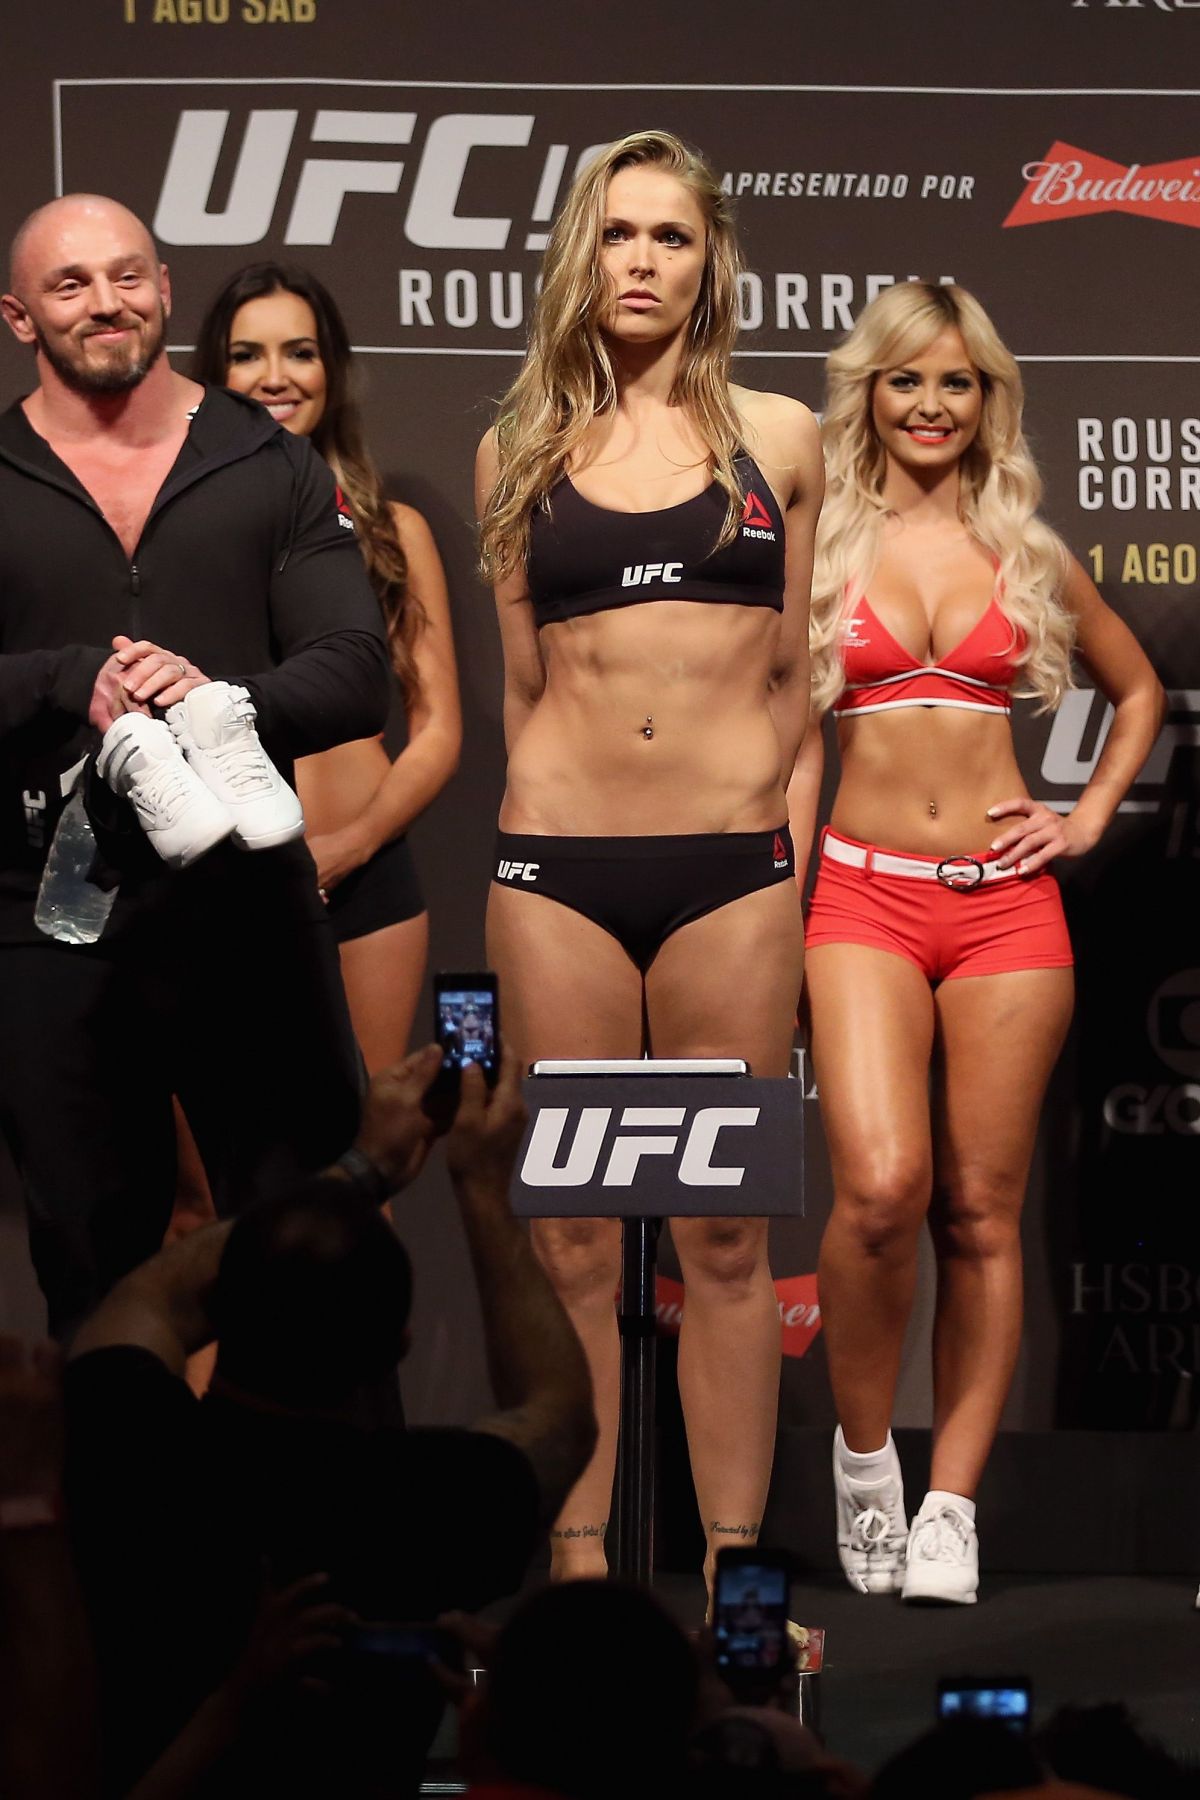 Ronda Rousey KOs Bethe Correia in 34 Seconds at UFC 190